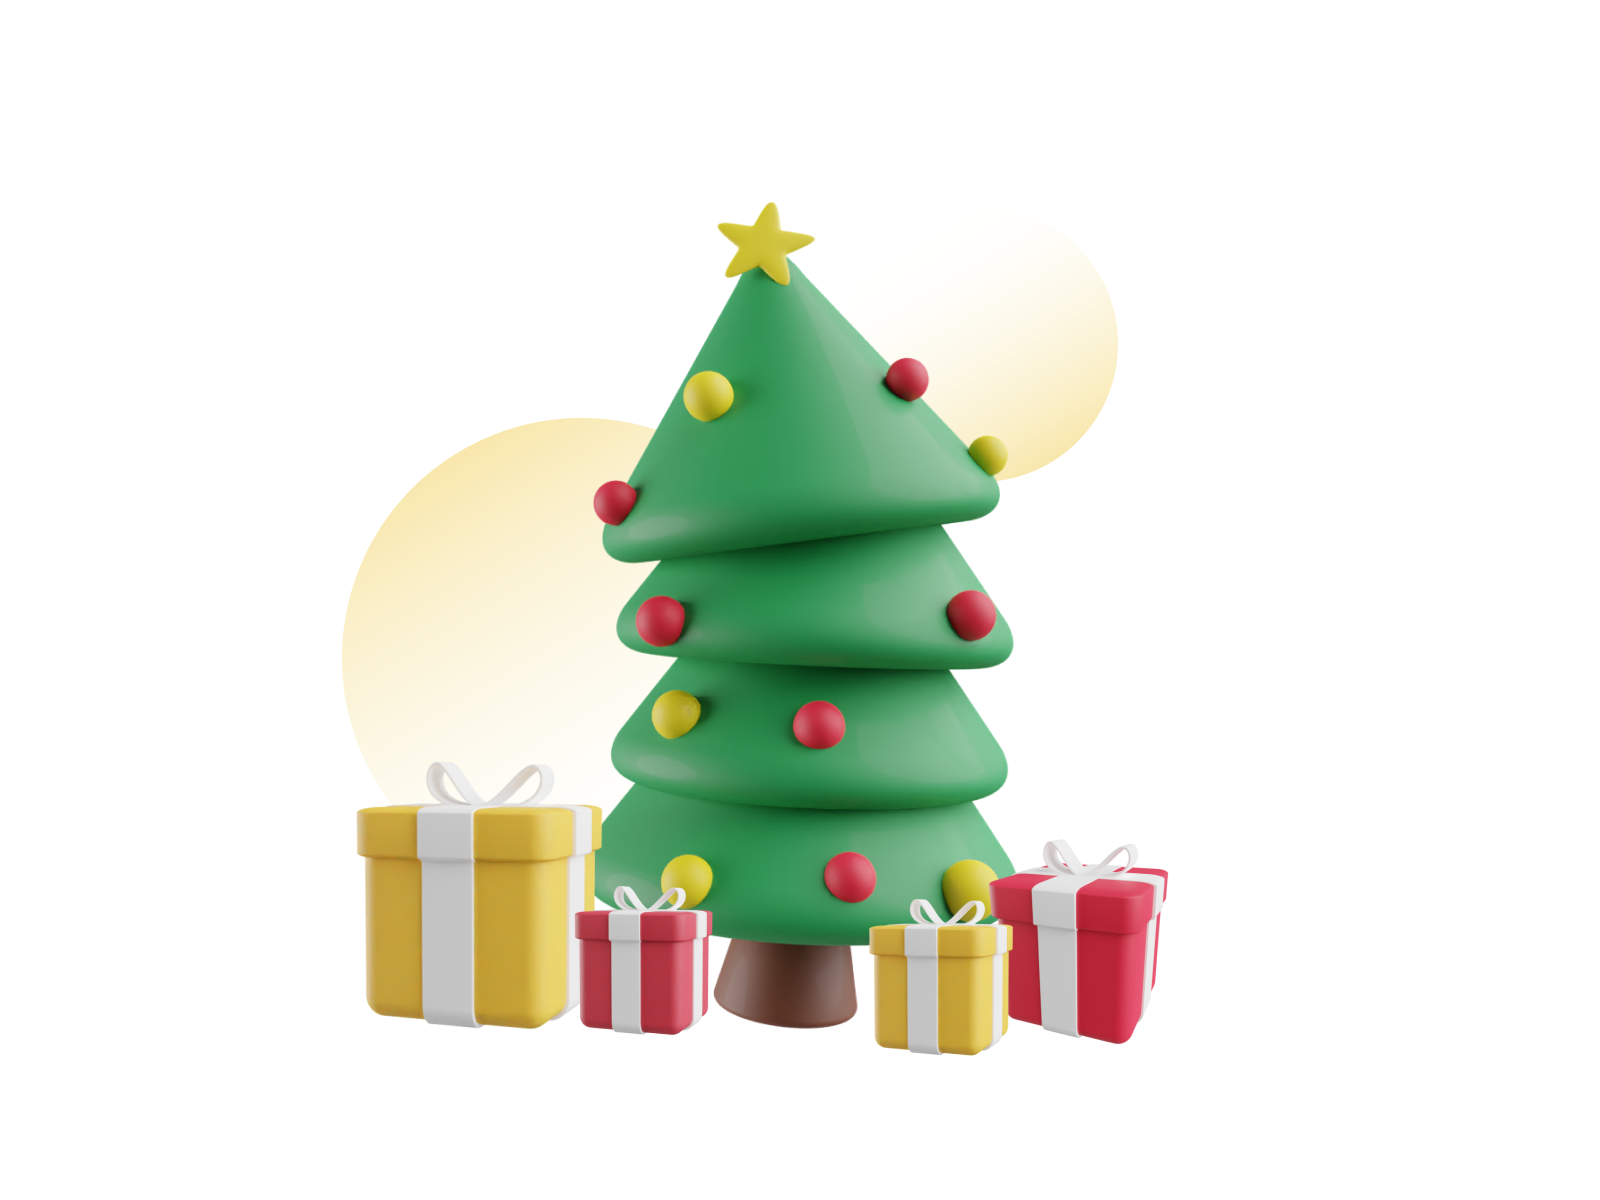 christmas clipart for microsoft word